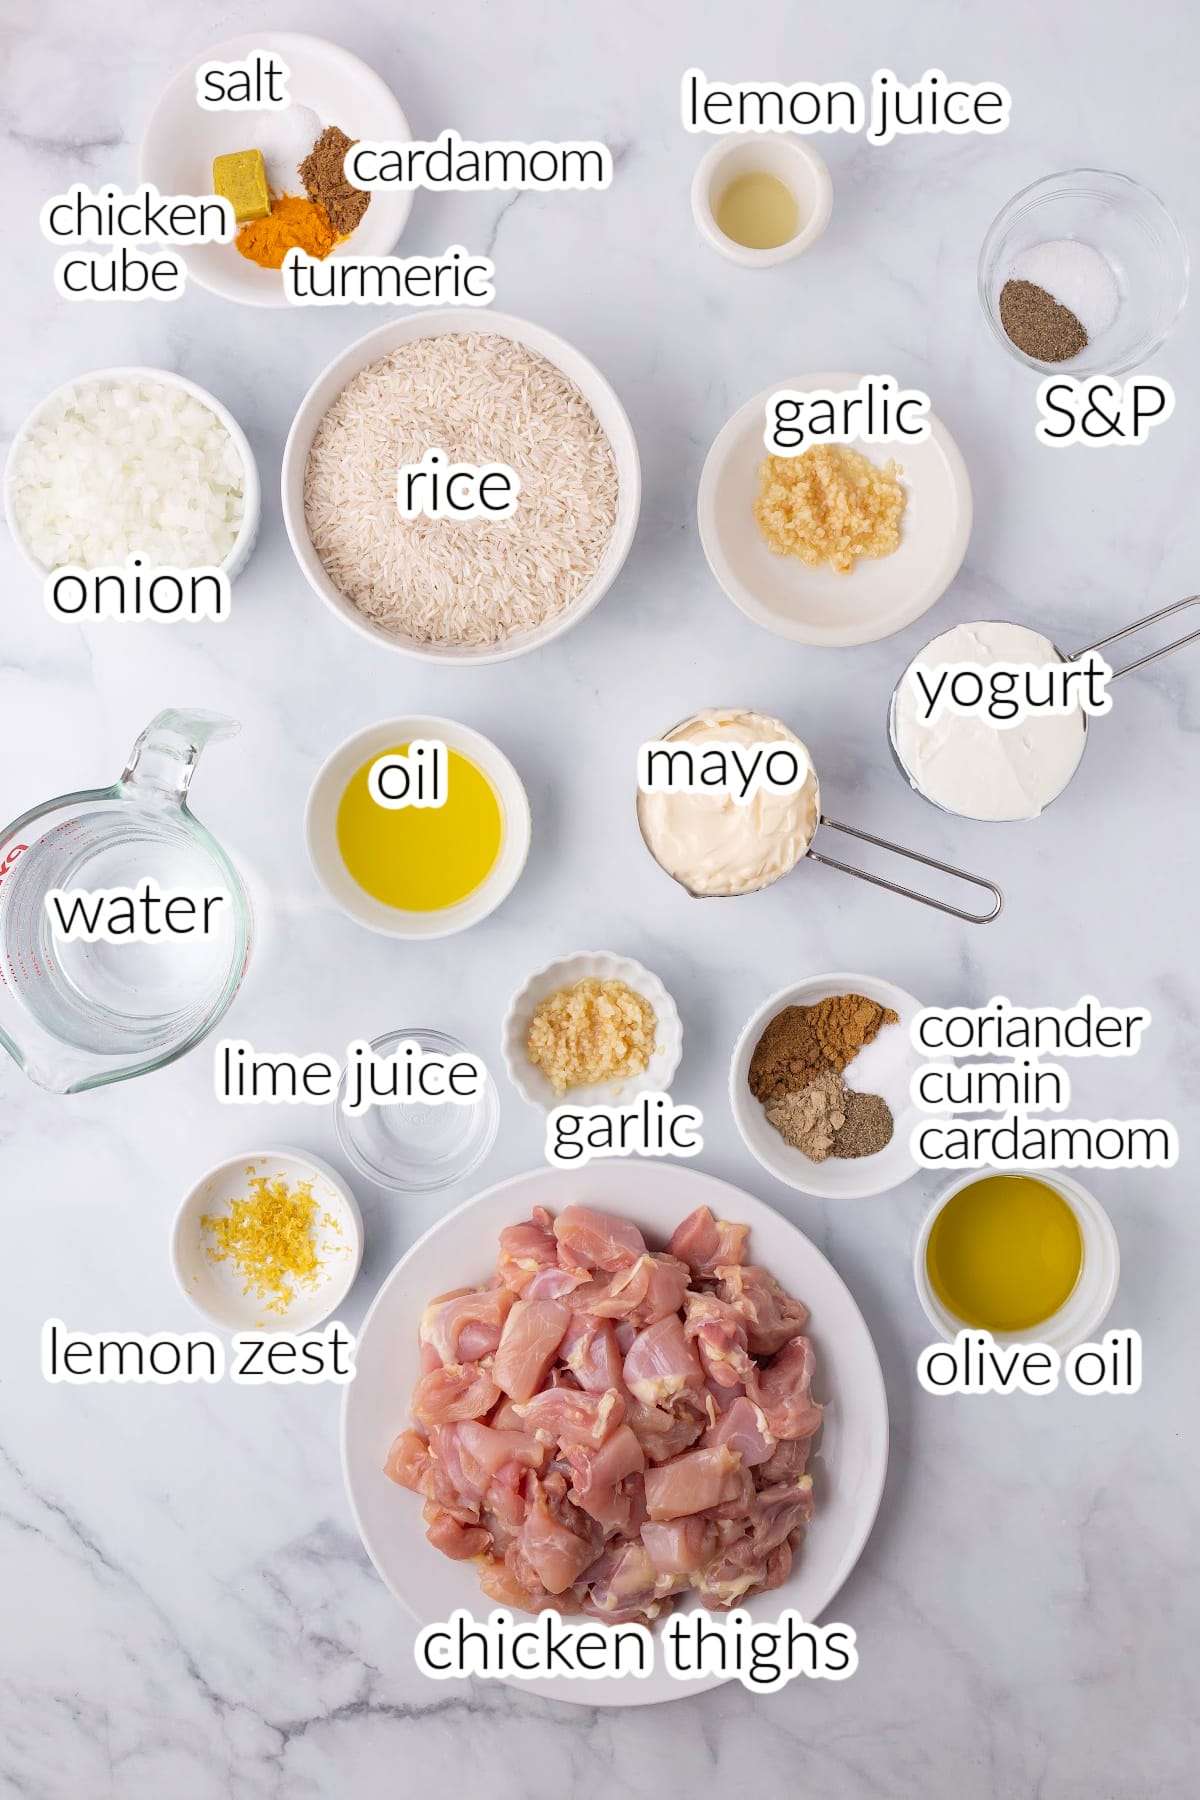 Ingredients for this recipe on a marble counter top.